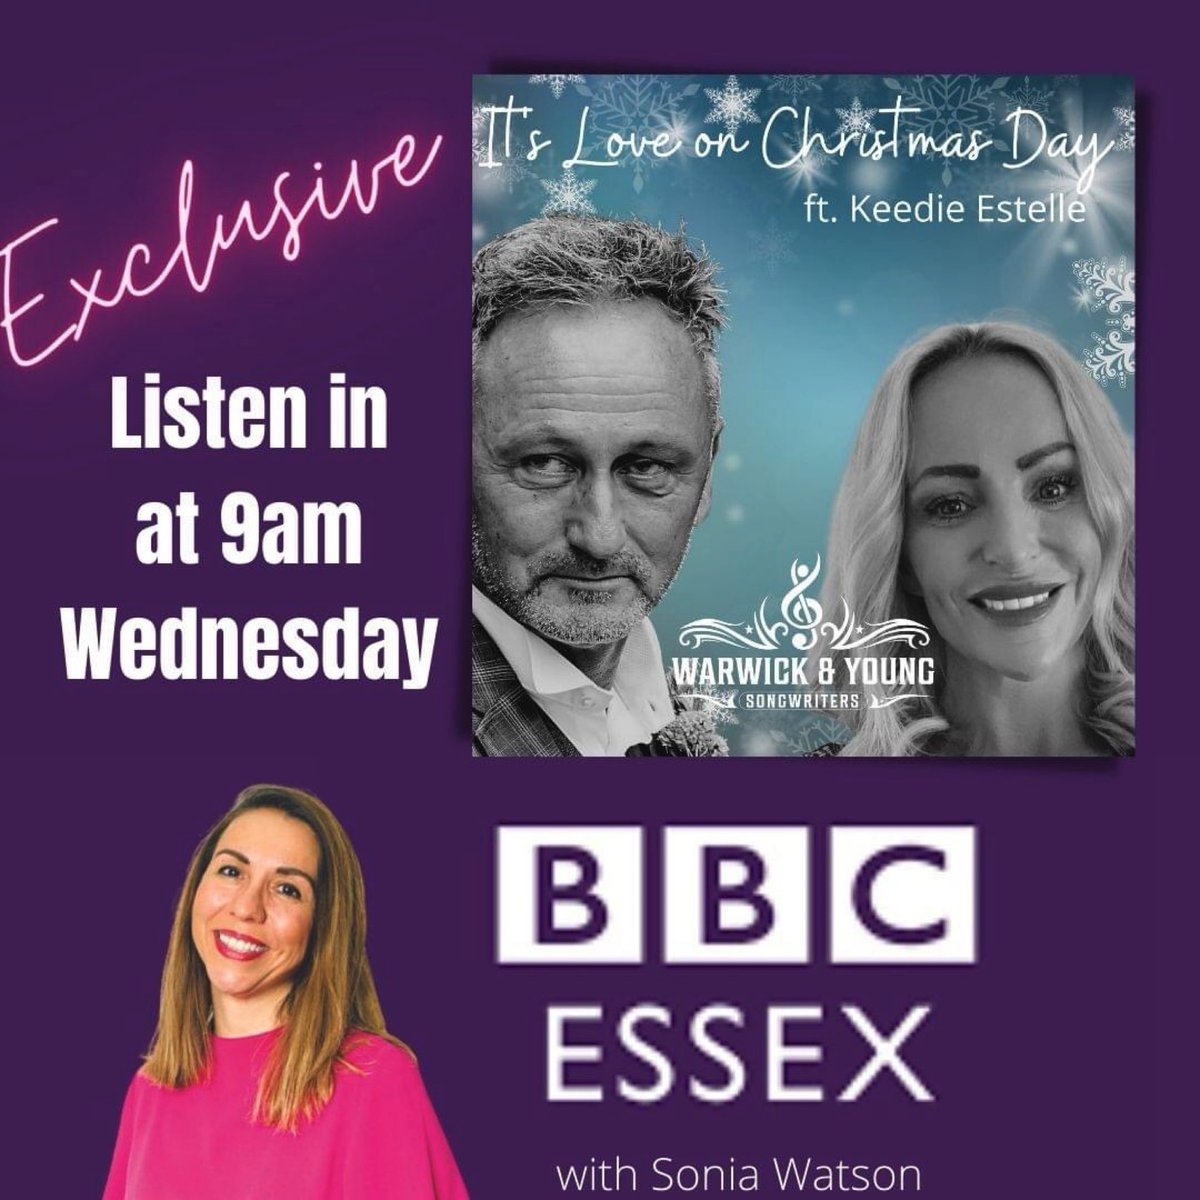 This was a blast earlier today, great interview and great feedback for song… #bbcessex #christmassong @keedieEstelle @WarwickandYoung #countrypop #lovesong